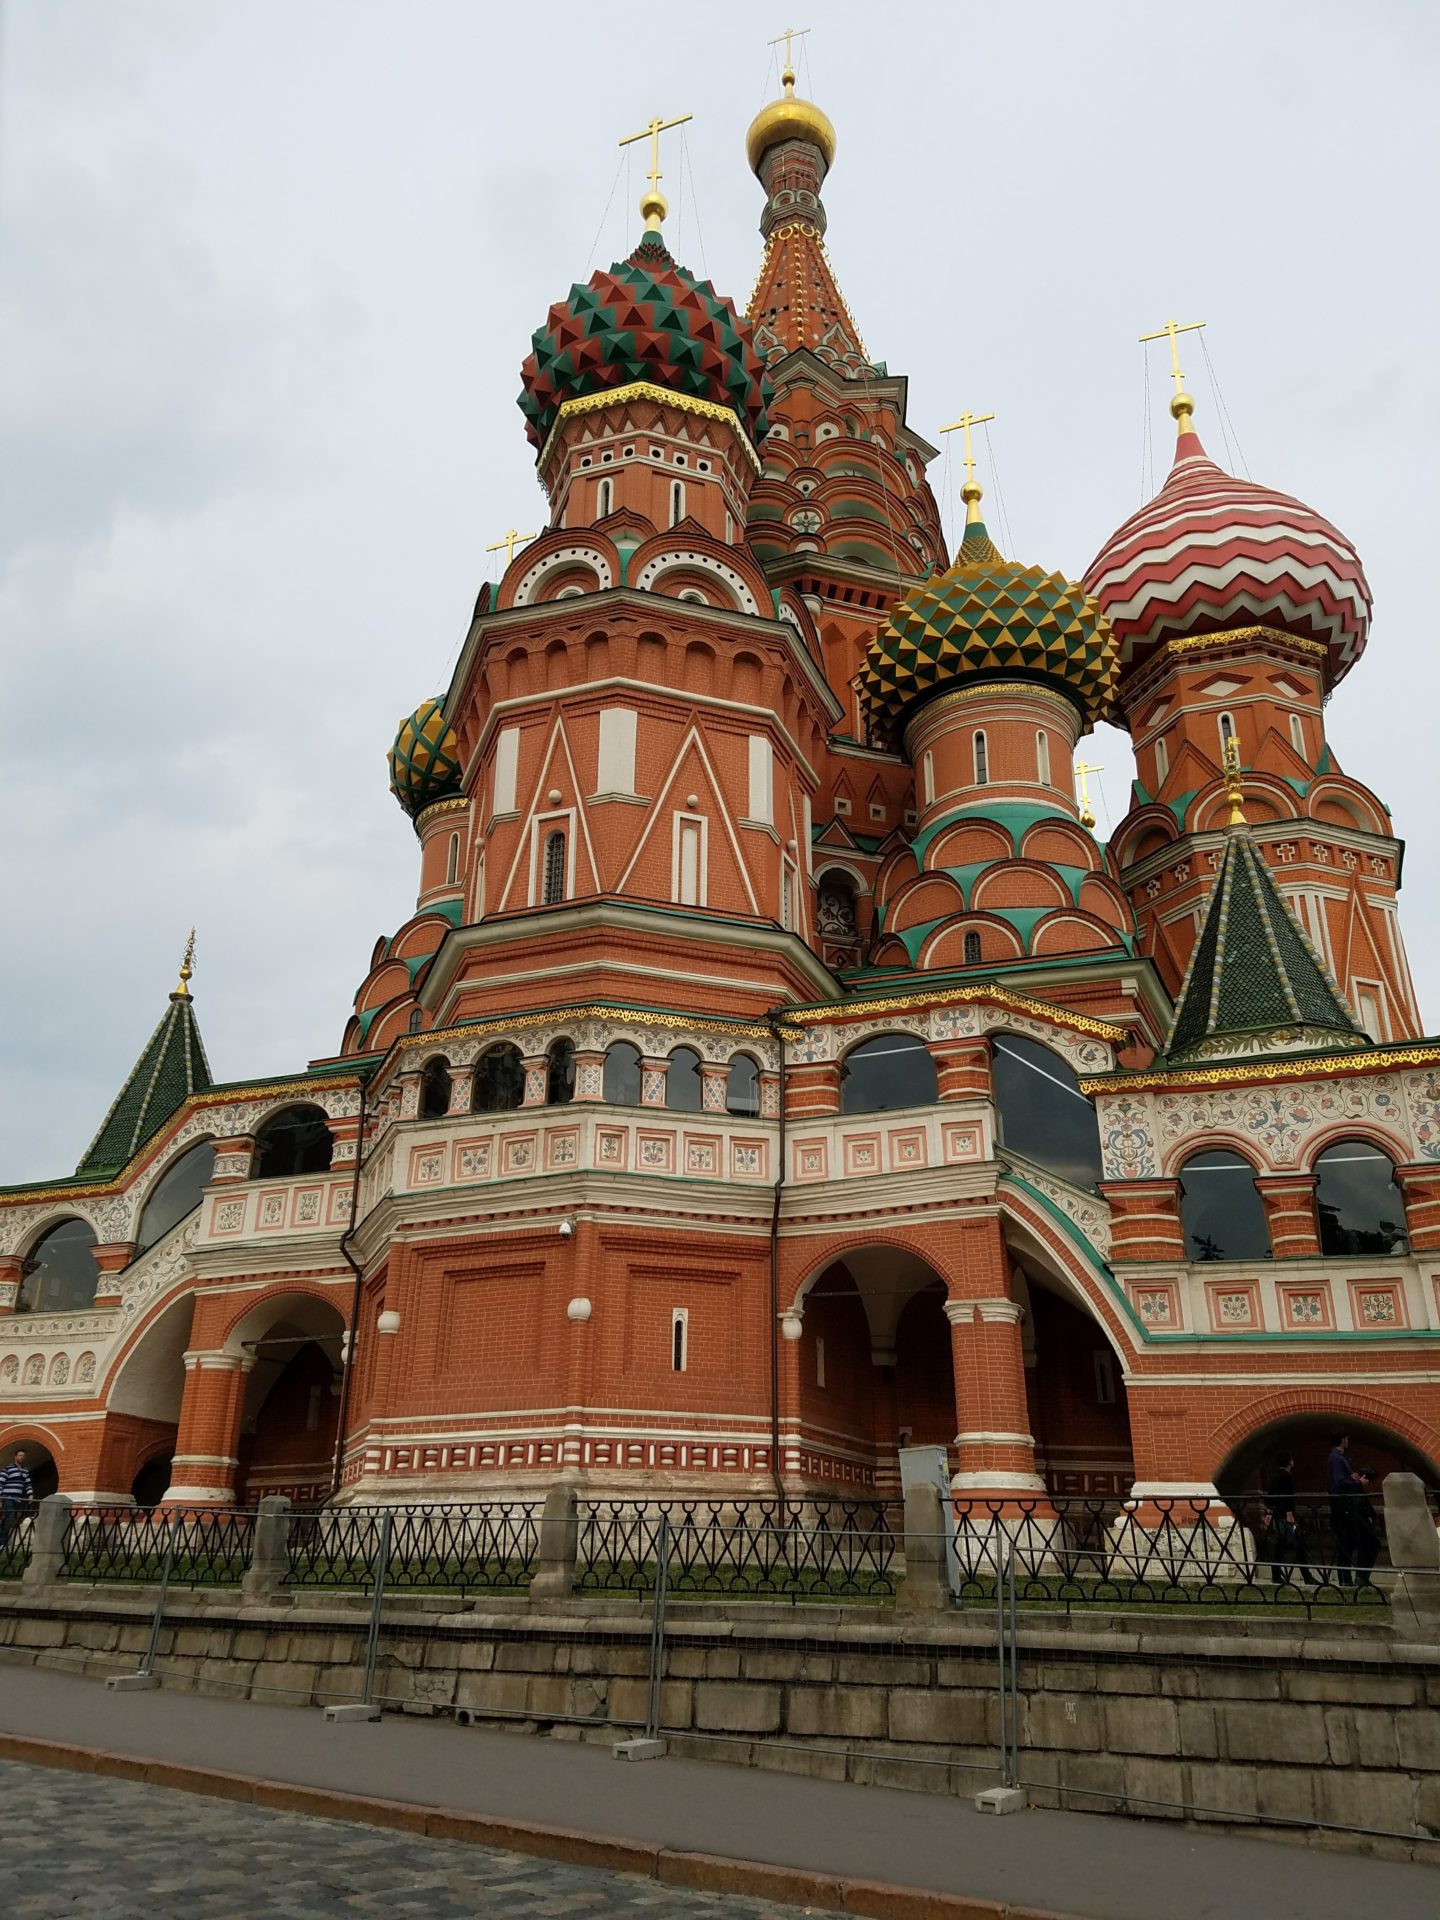 Saint Basil's Cathedral with many towers